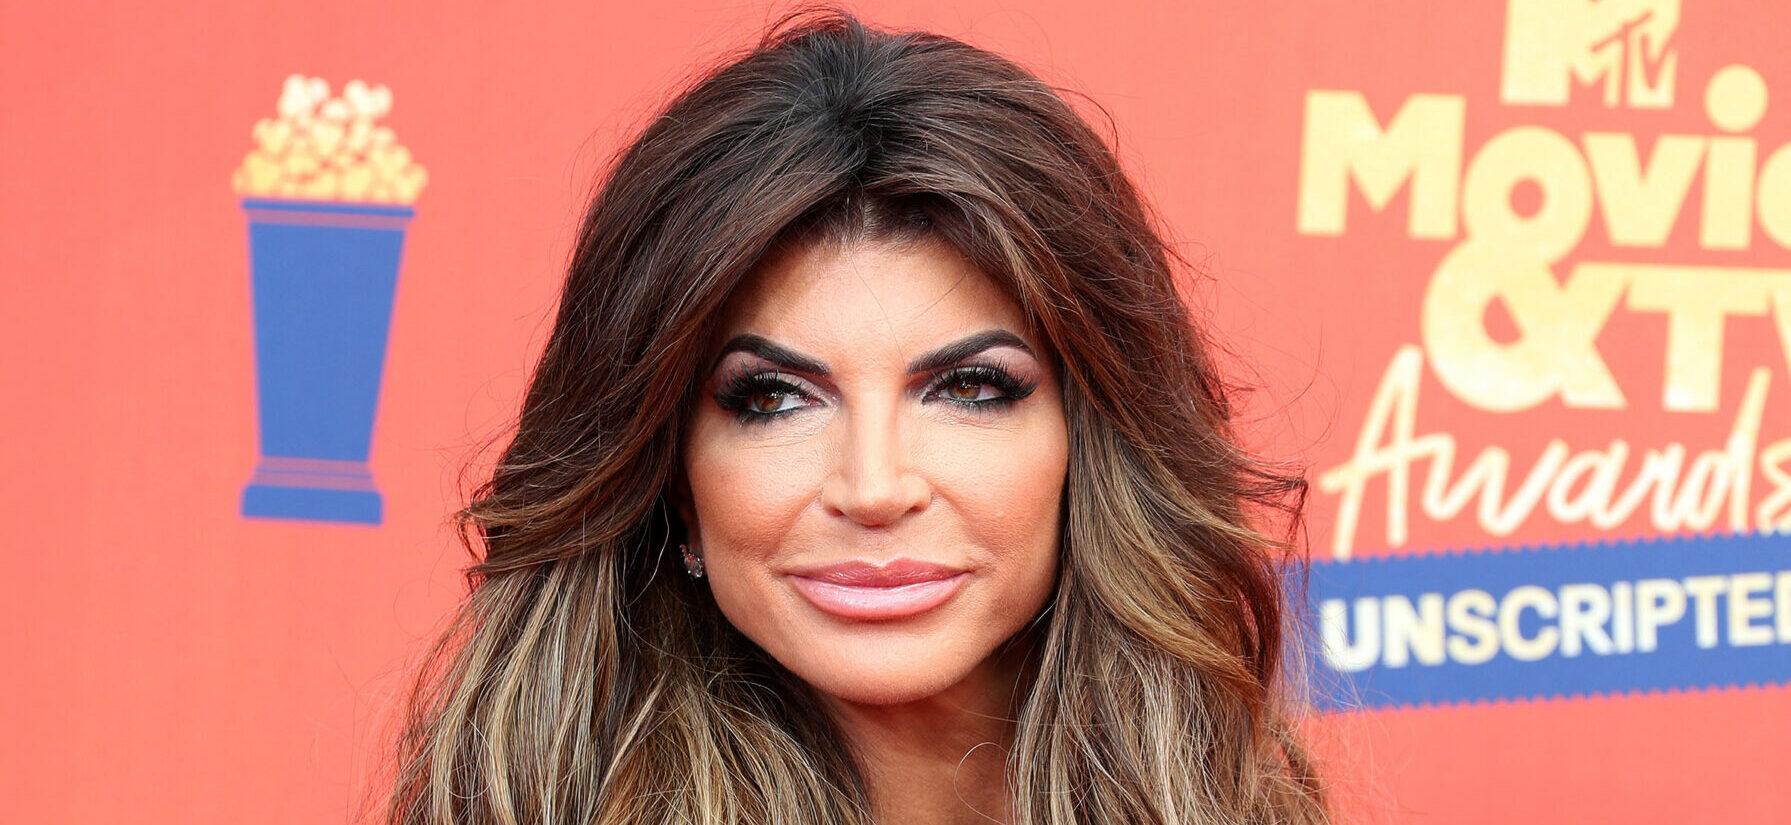 Teresa Giudice’s New Photos Spark Ozempic Accusations From Fans: ‘Ozempic Barbie’